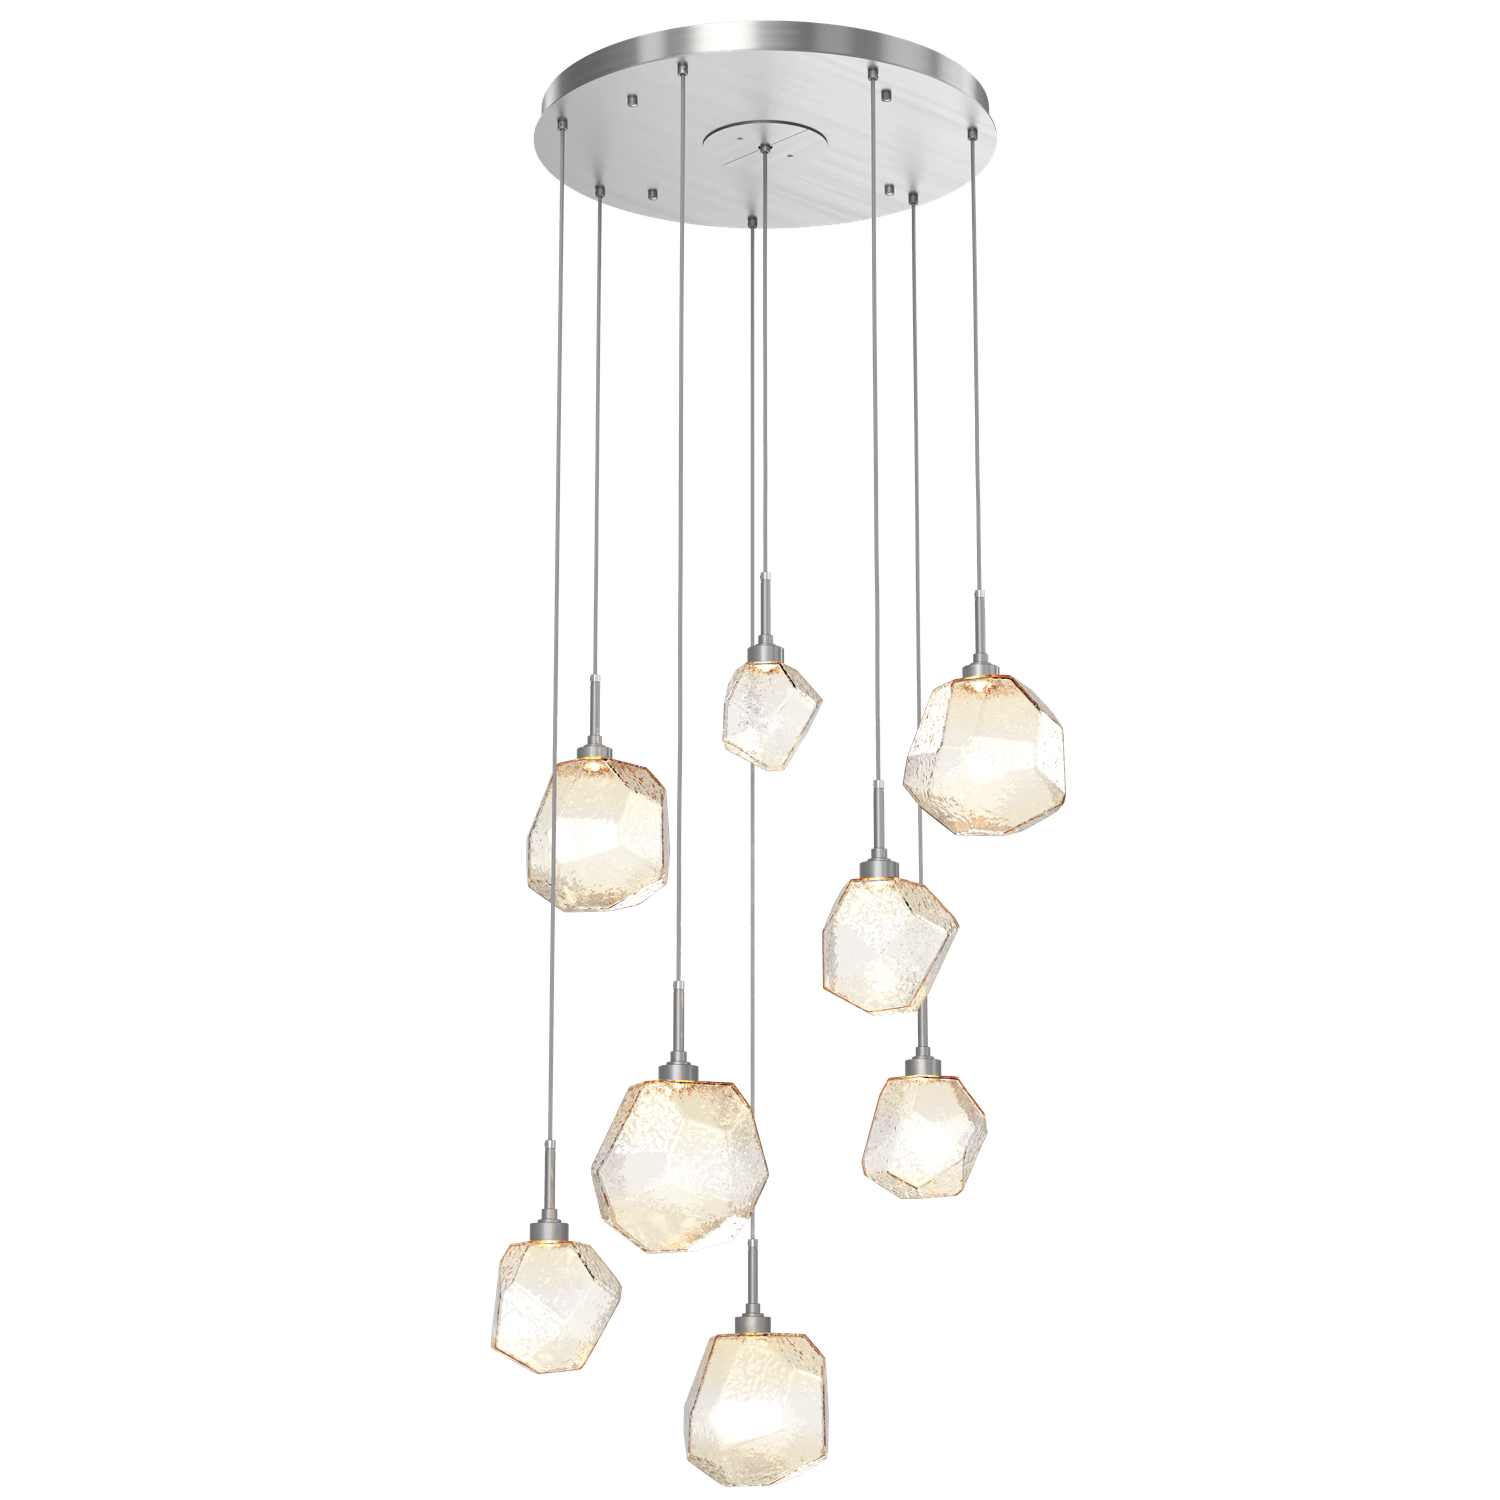 CHB0039-08-SN-A-Hammerton-Studio-Gem-8-light-round-pendant-chandelier-with-satin-nickel-finish-and-amber-blown-glass-shades-and-LED-lamping